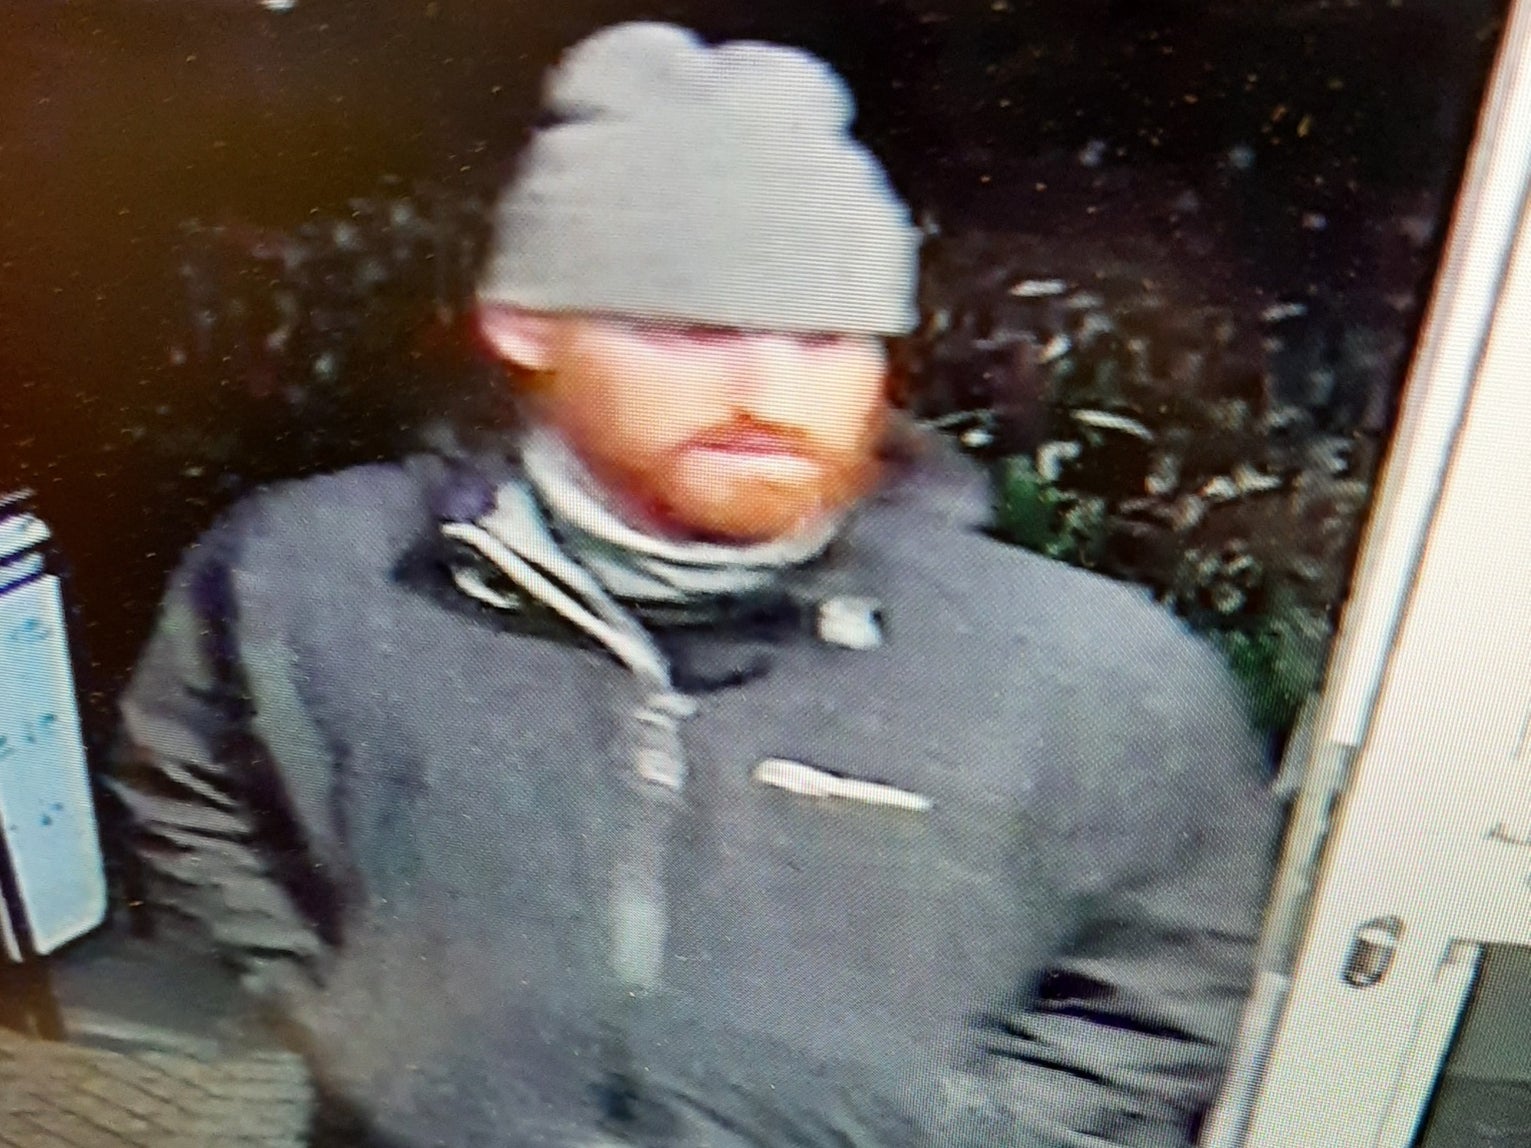 Police have released a CCTV image of a man we would like to identify following a theft in Watford